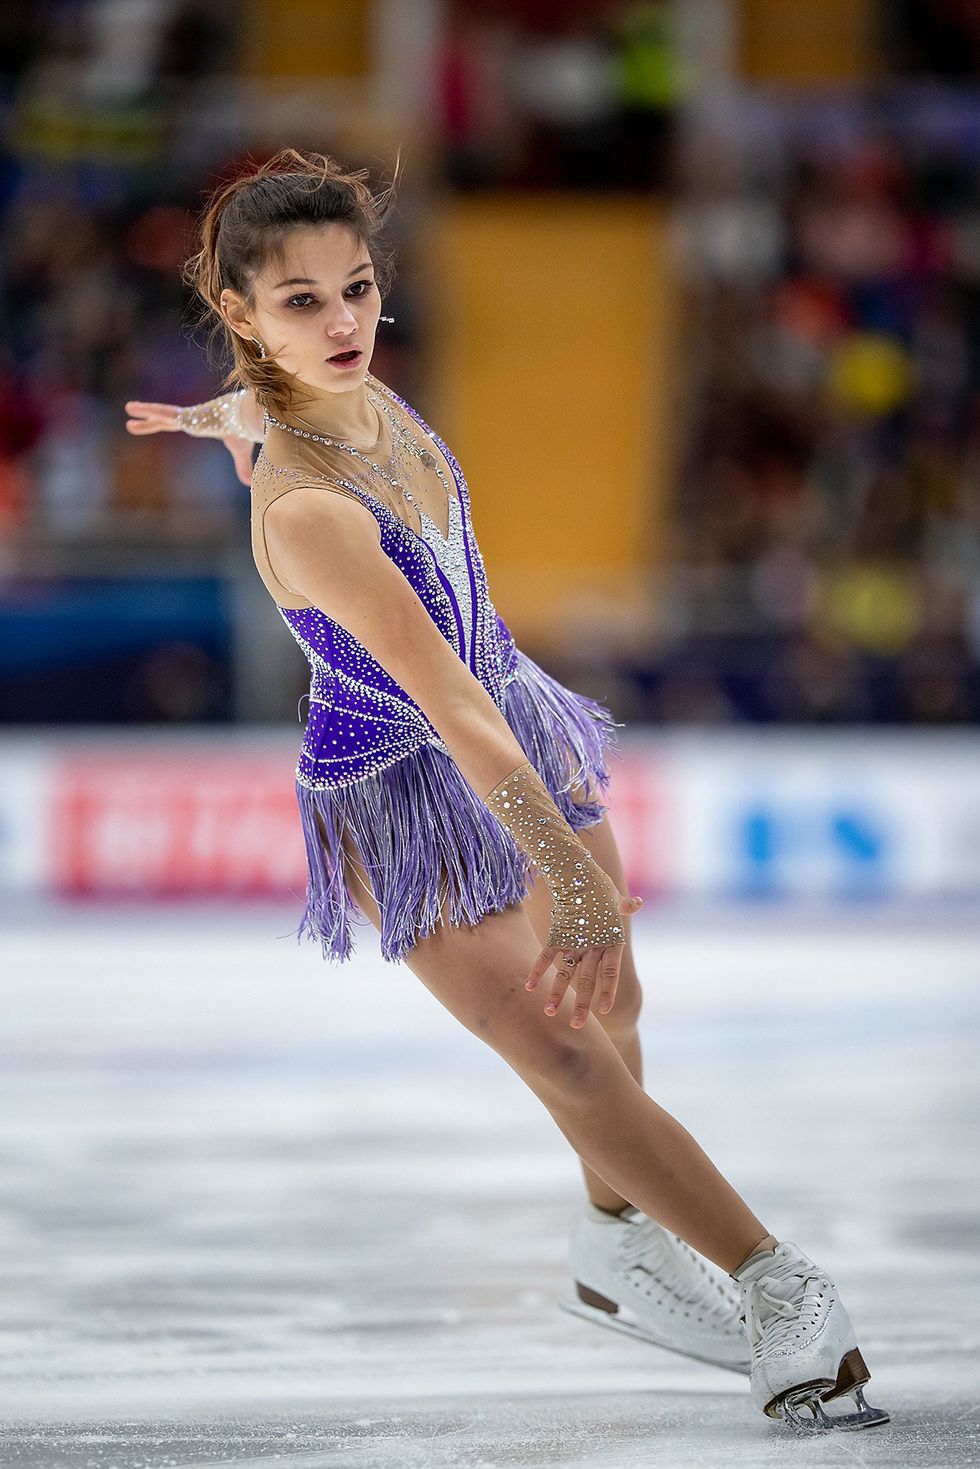 Figure skate, Ice skating, Figure skating, Skating, Ice dancing, Recreation, Sports, Axel jump, Beauty, Ice skate, 